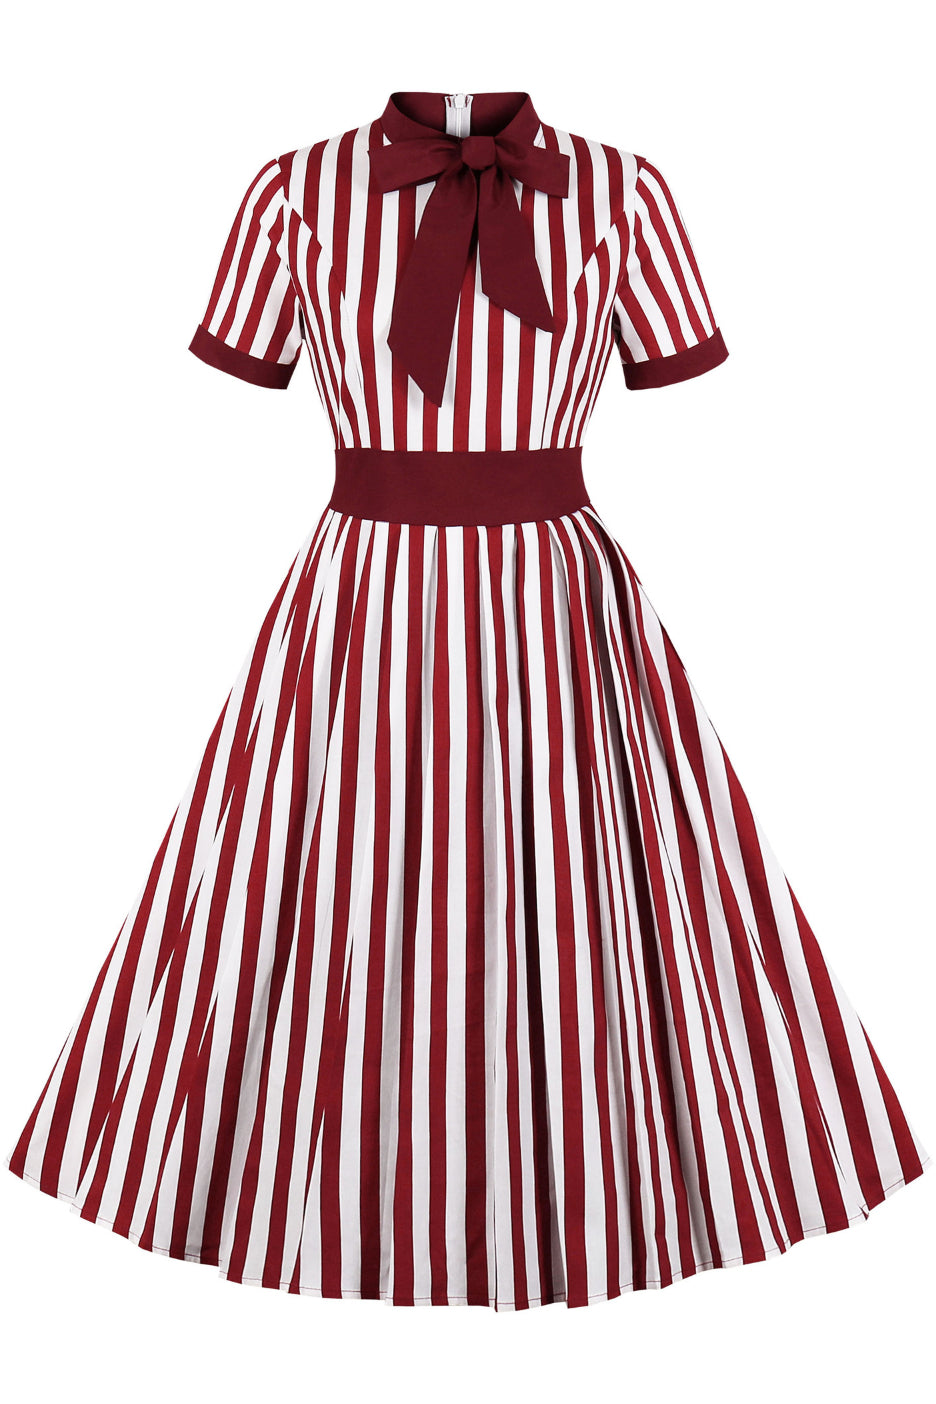 Red Ribbon Collar Short Sleeves A-line Vintage Dress